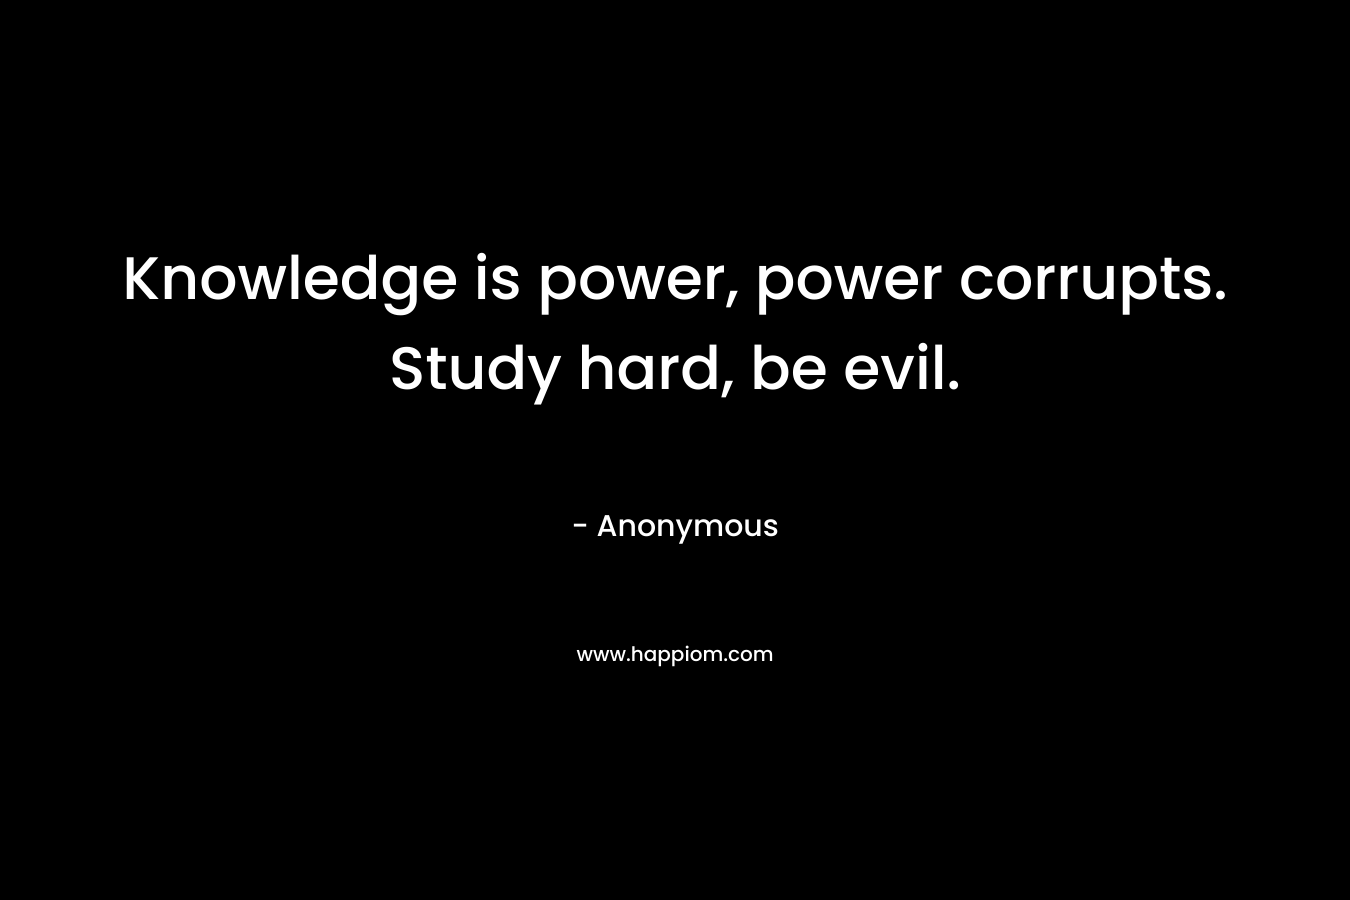 Knowledge is power, power corrupts. Study hard, be evil.